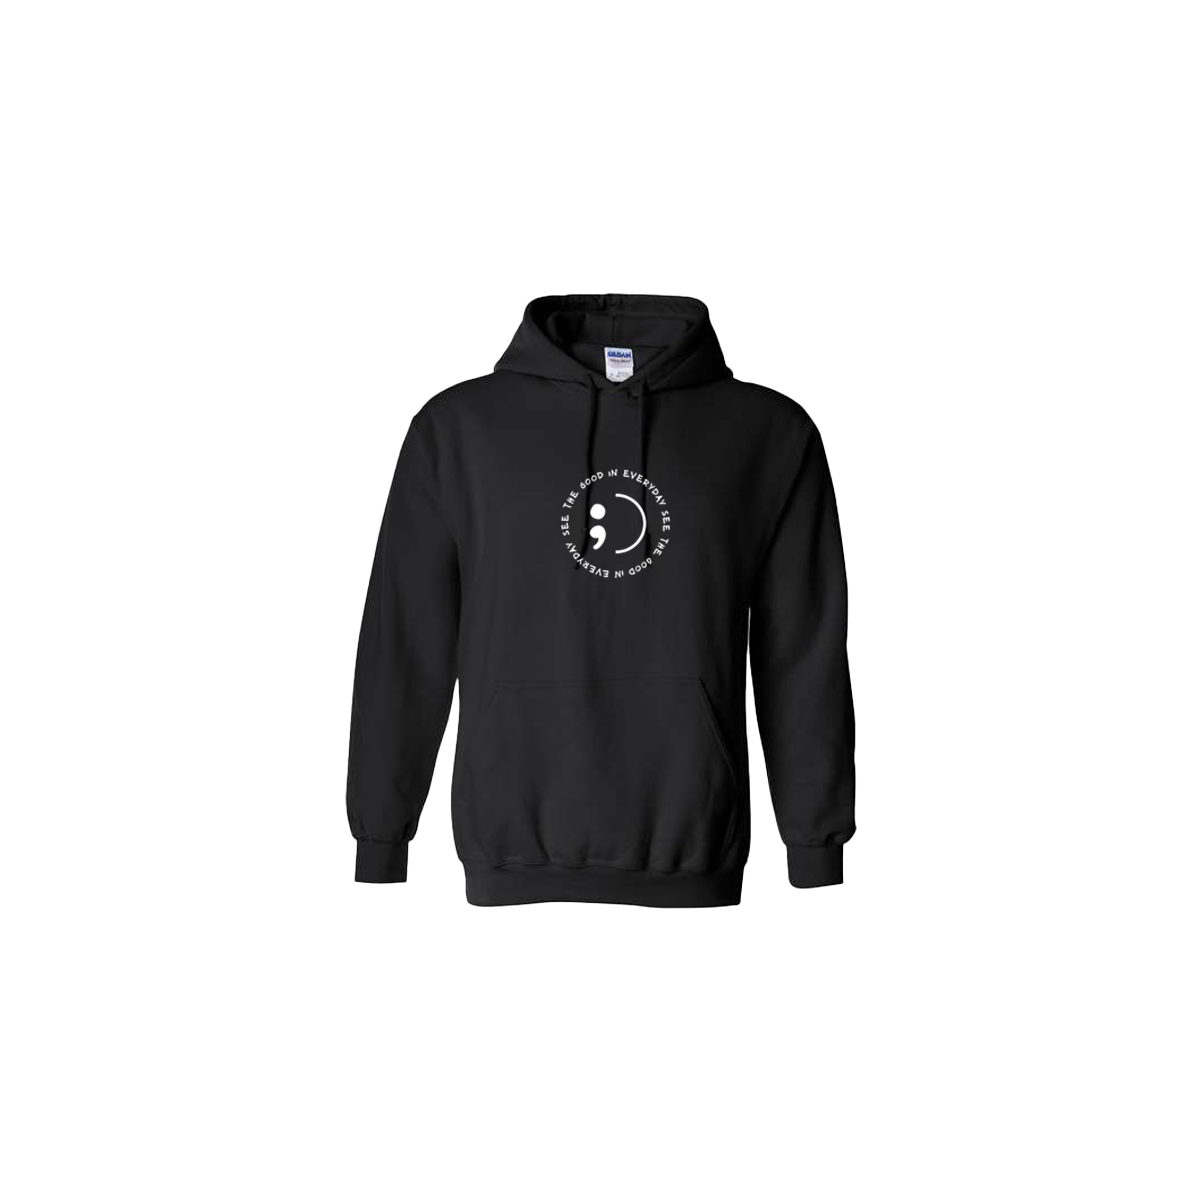 See the Good in Everyday Embroidered Black Hoodie - Mental Health Awareness Clothing